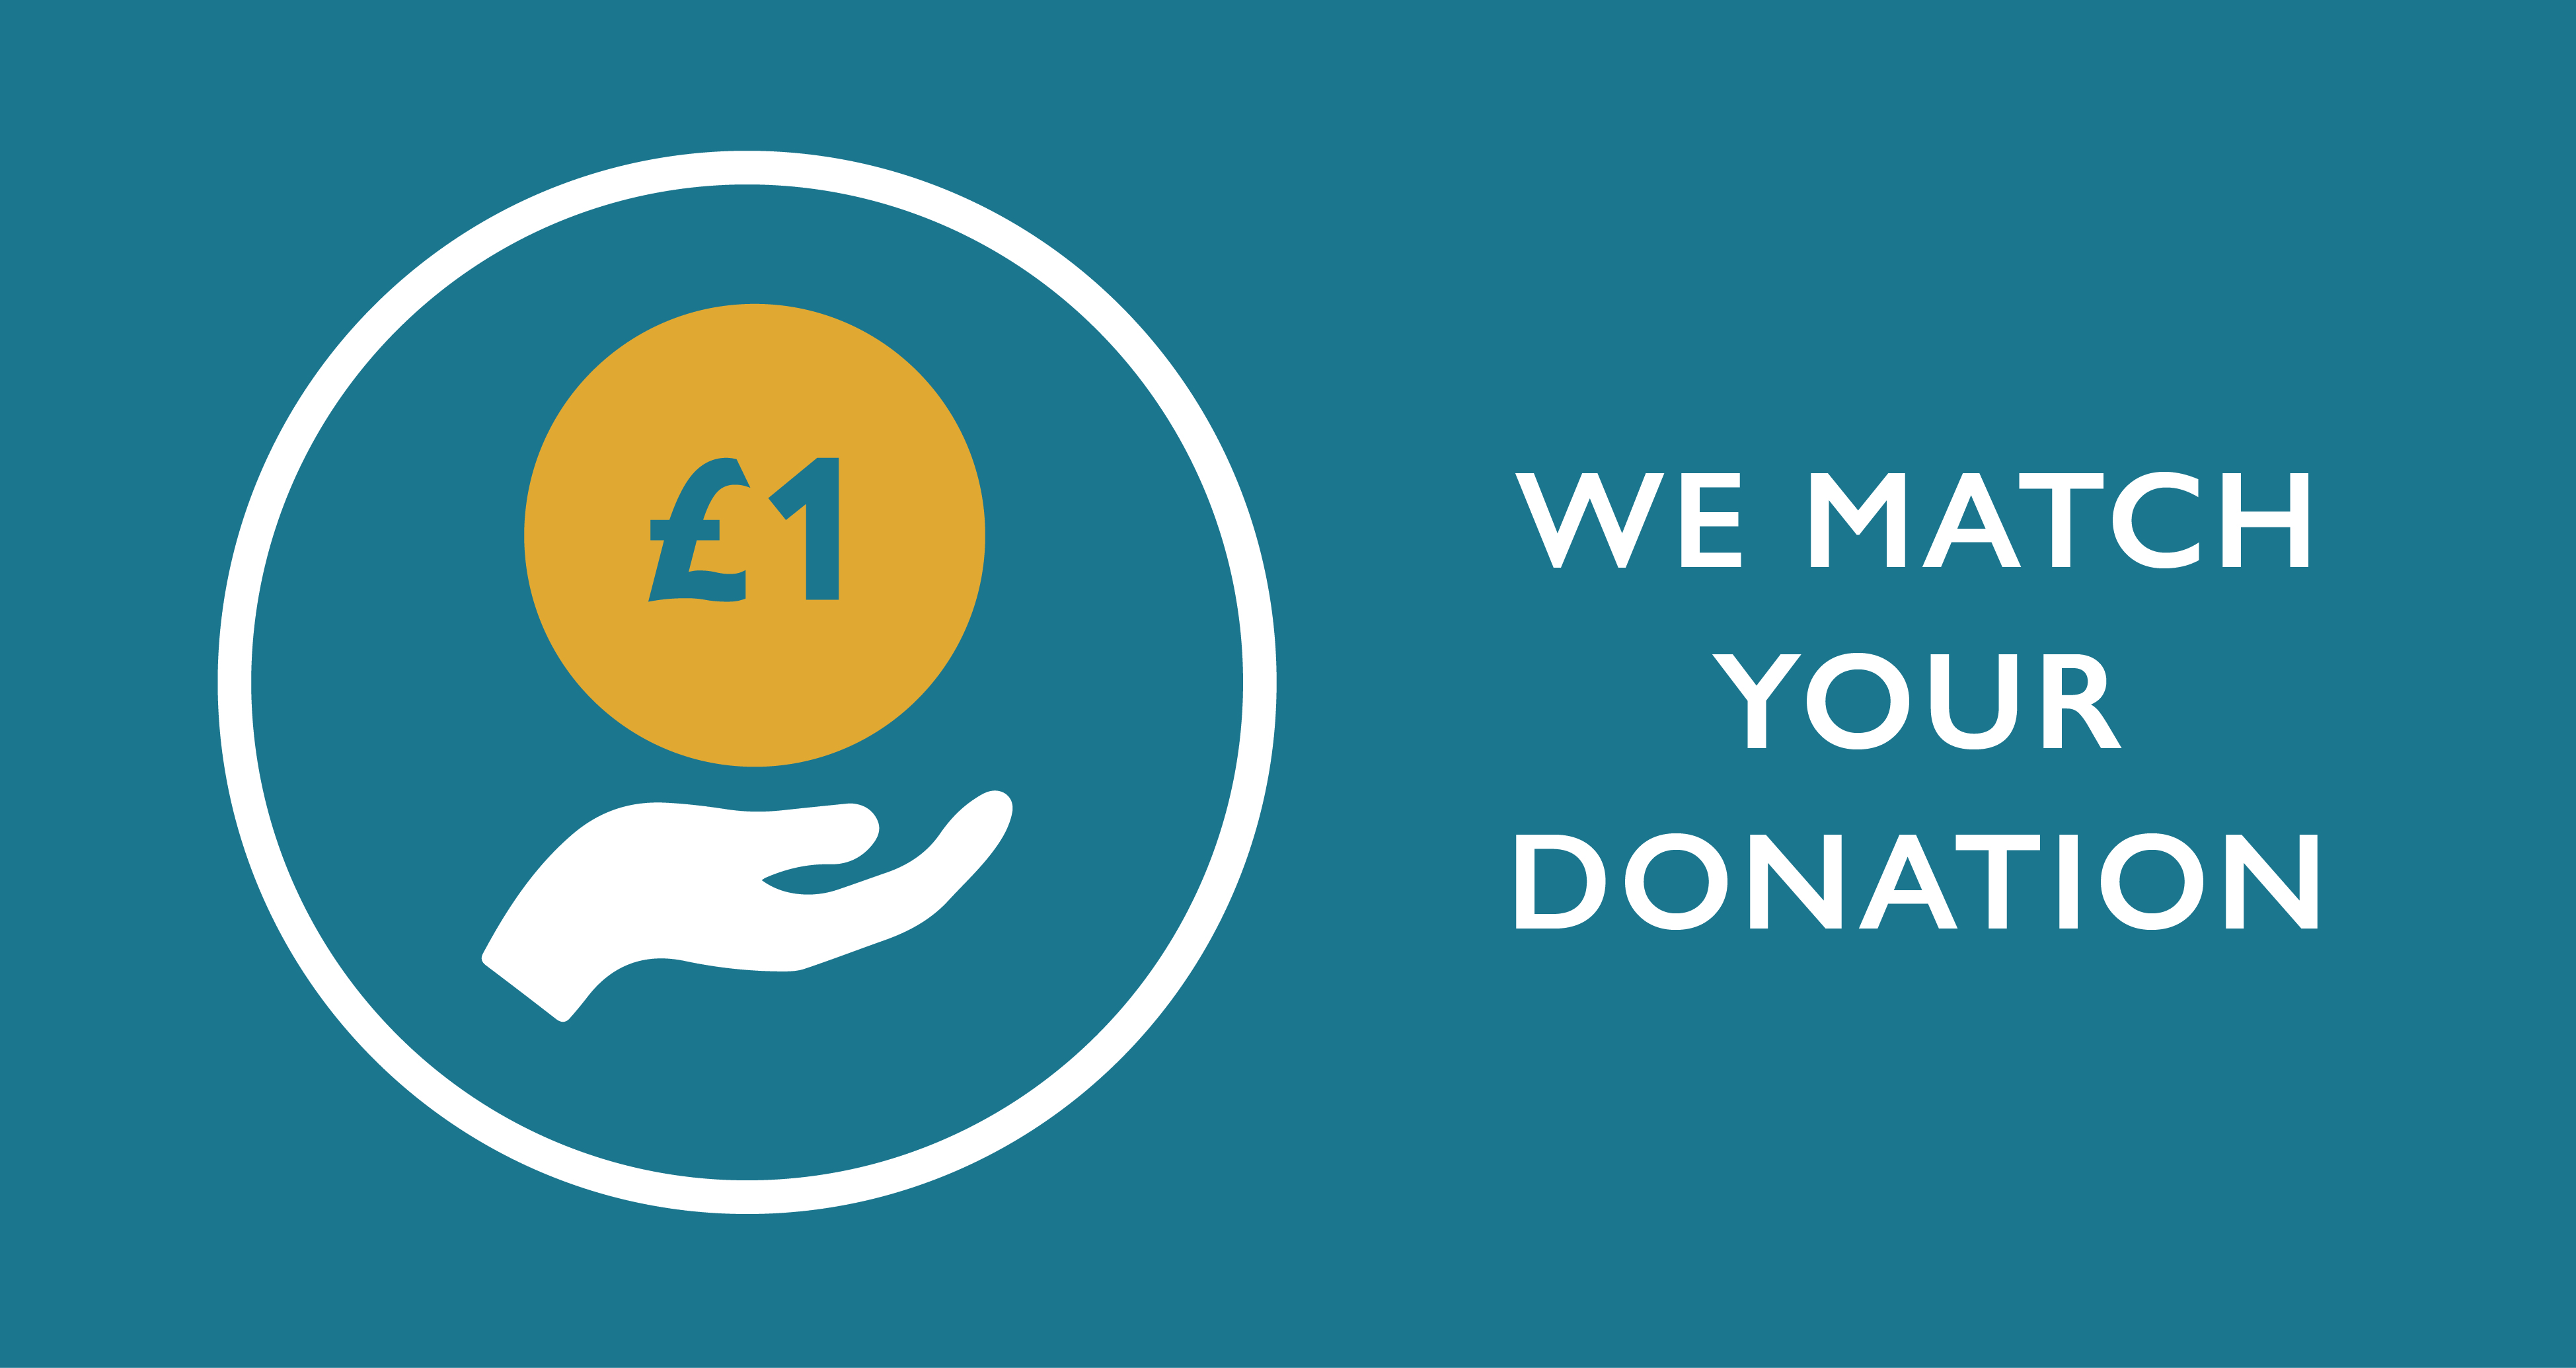 Matching donation, hand and pound icon